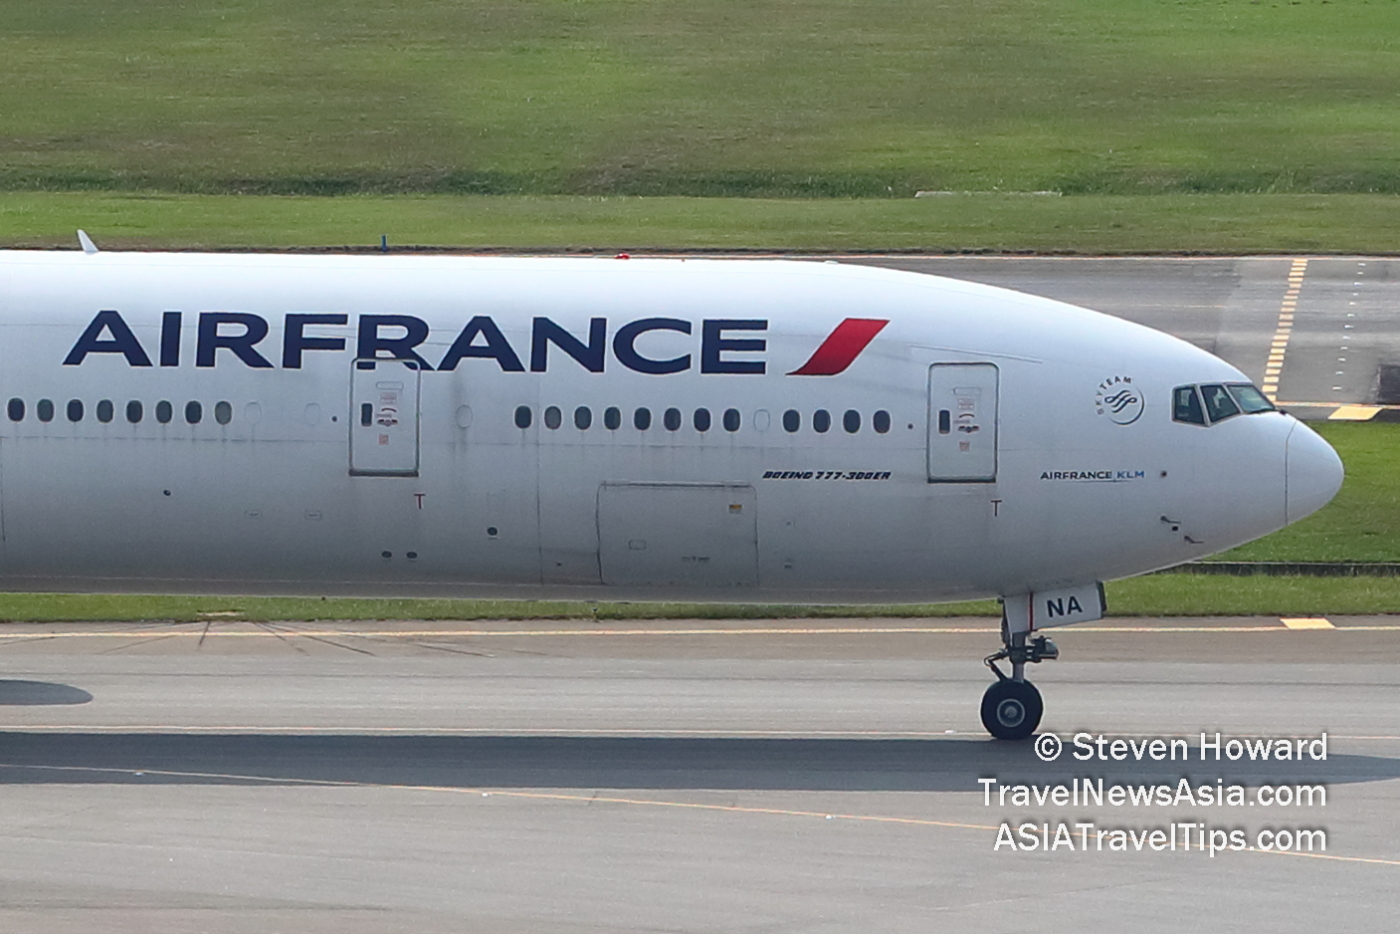 Air France Boeing 777-300ER. Picture by Steven Howard of TravelNewsAsia.com Click to enlarge.